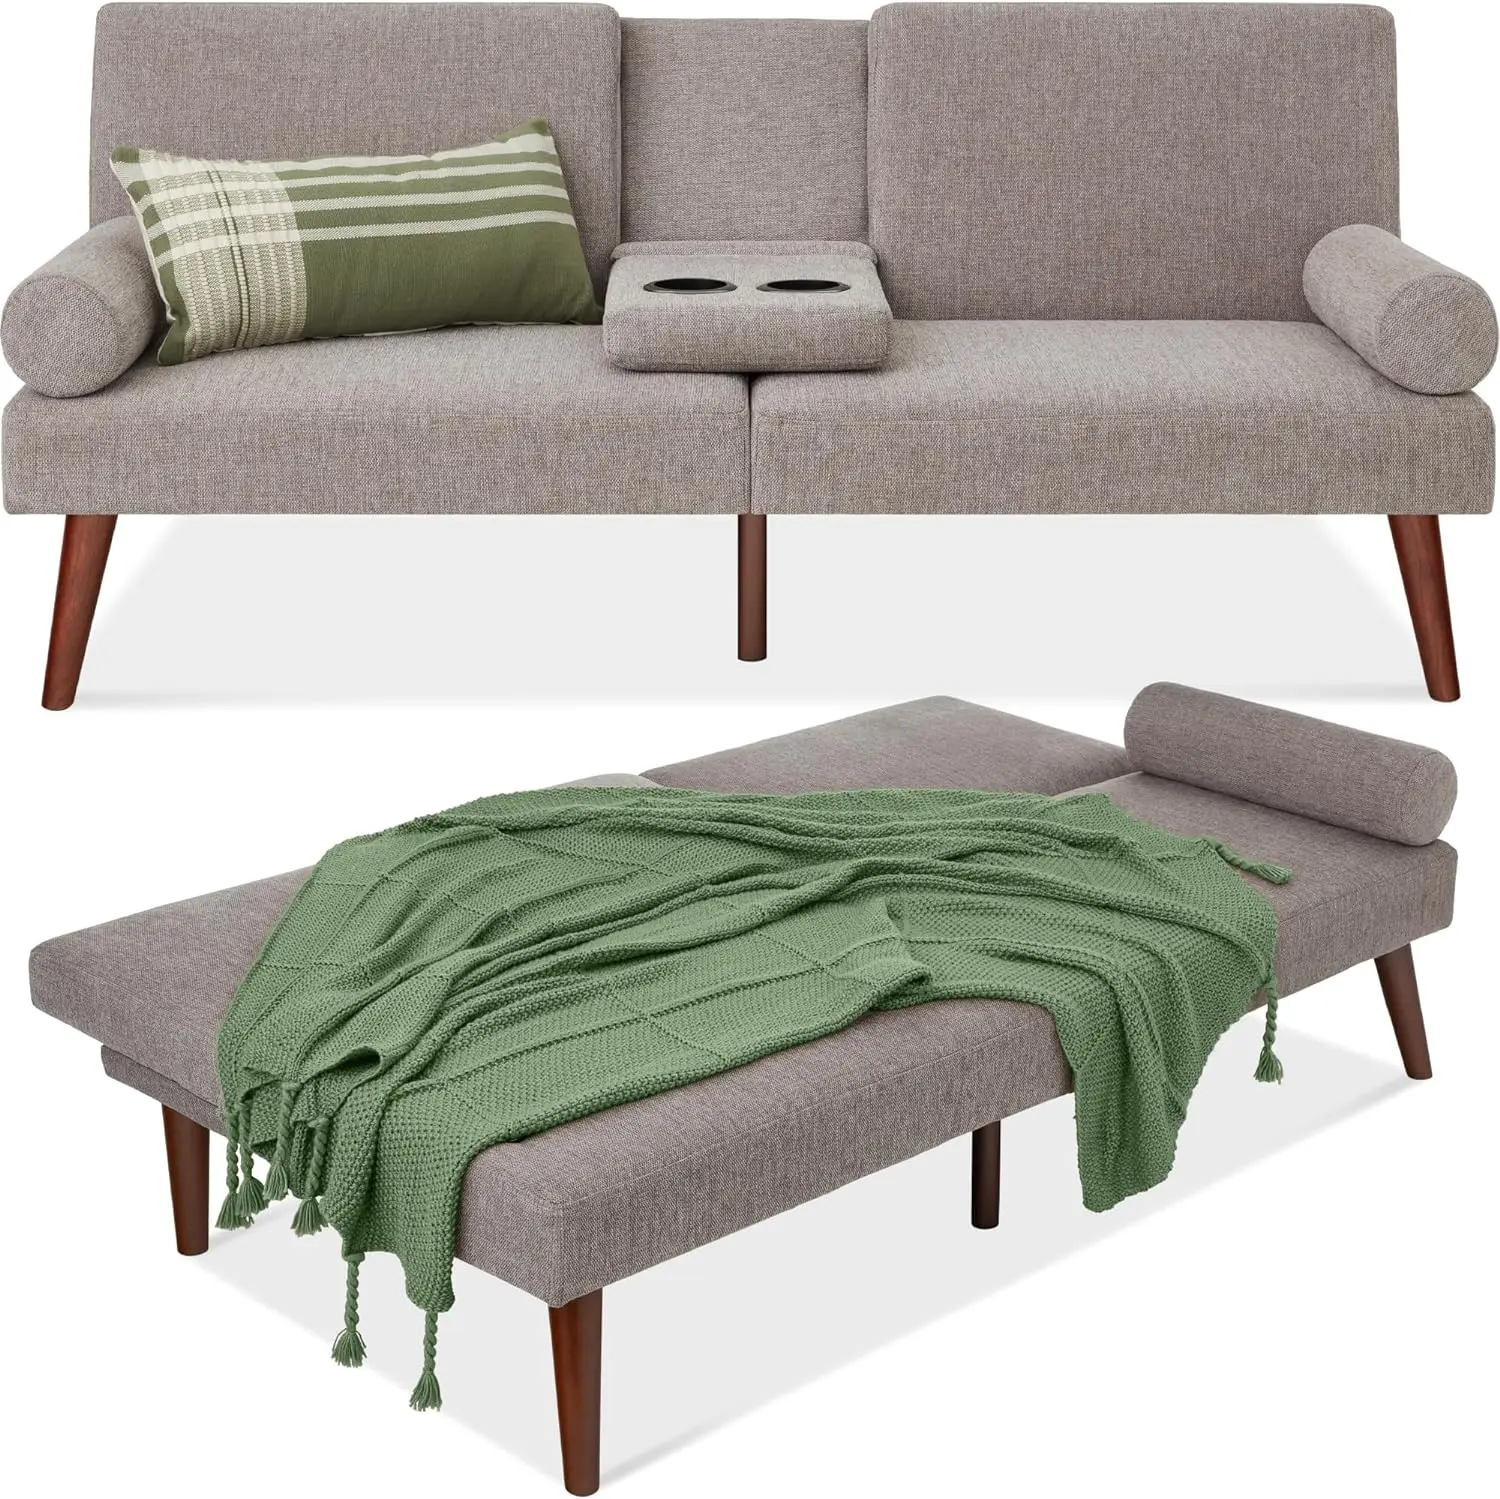 Mid-Century Modern Upholstered Futon, Convertible Folding Sofa Bed, Small Couch w/Rounded Armrests, 2 Cup holders